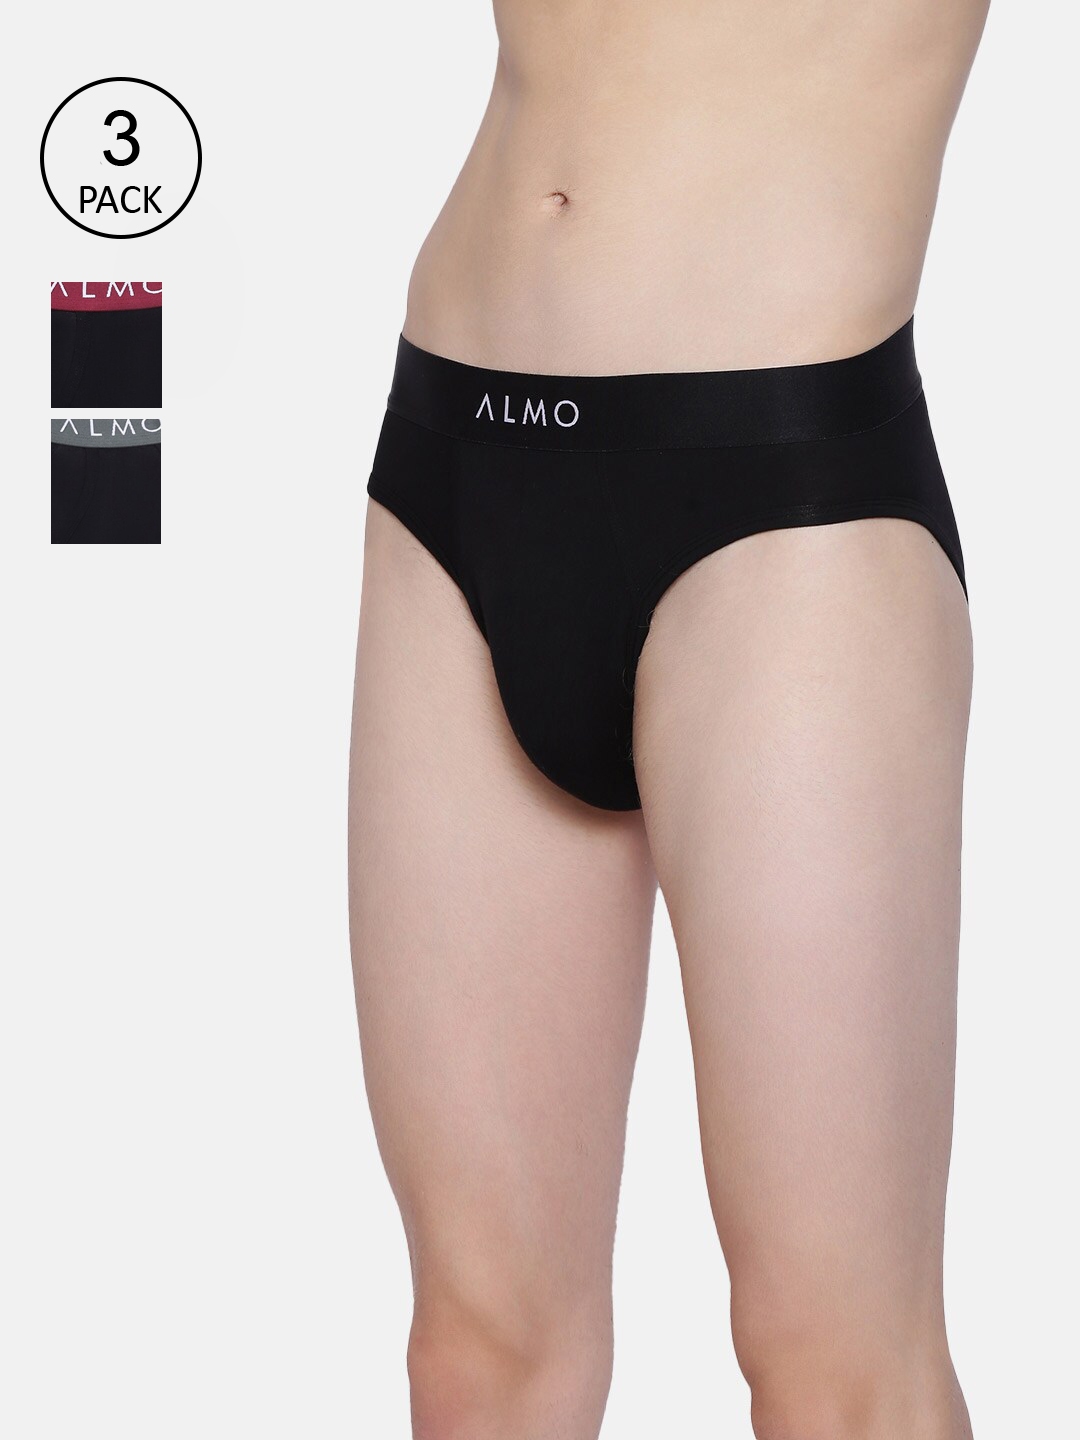 How Many Pairs of Underwears Should You Own?– Almo Wear